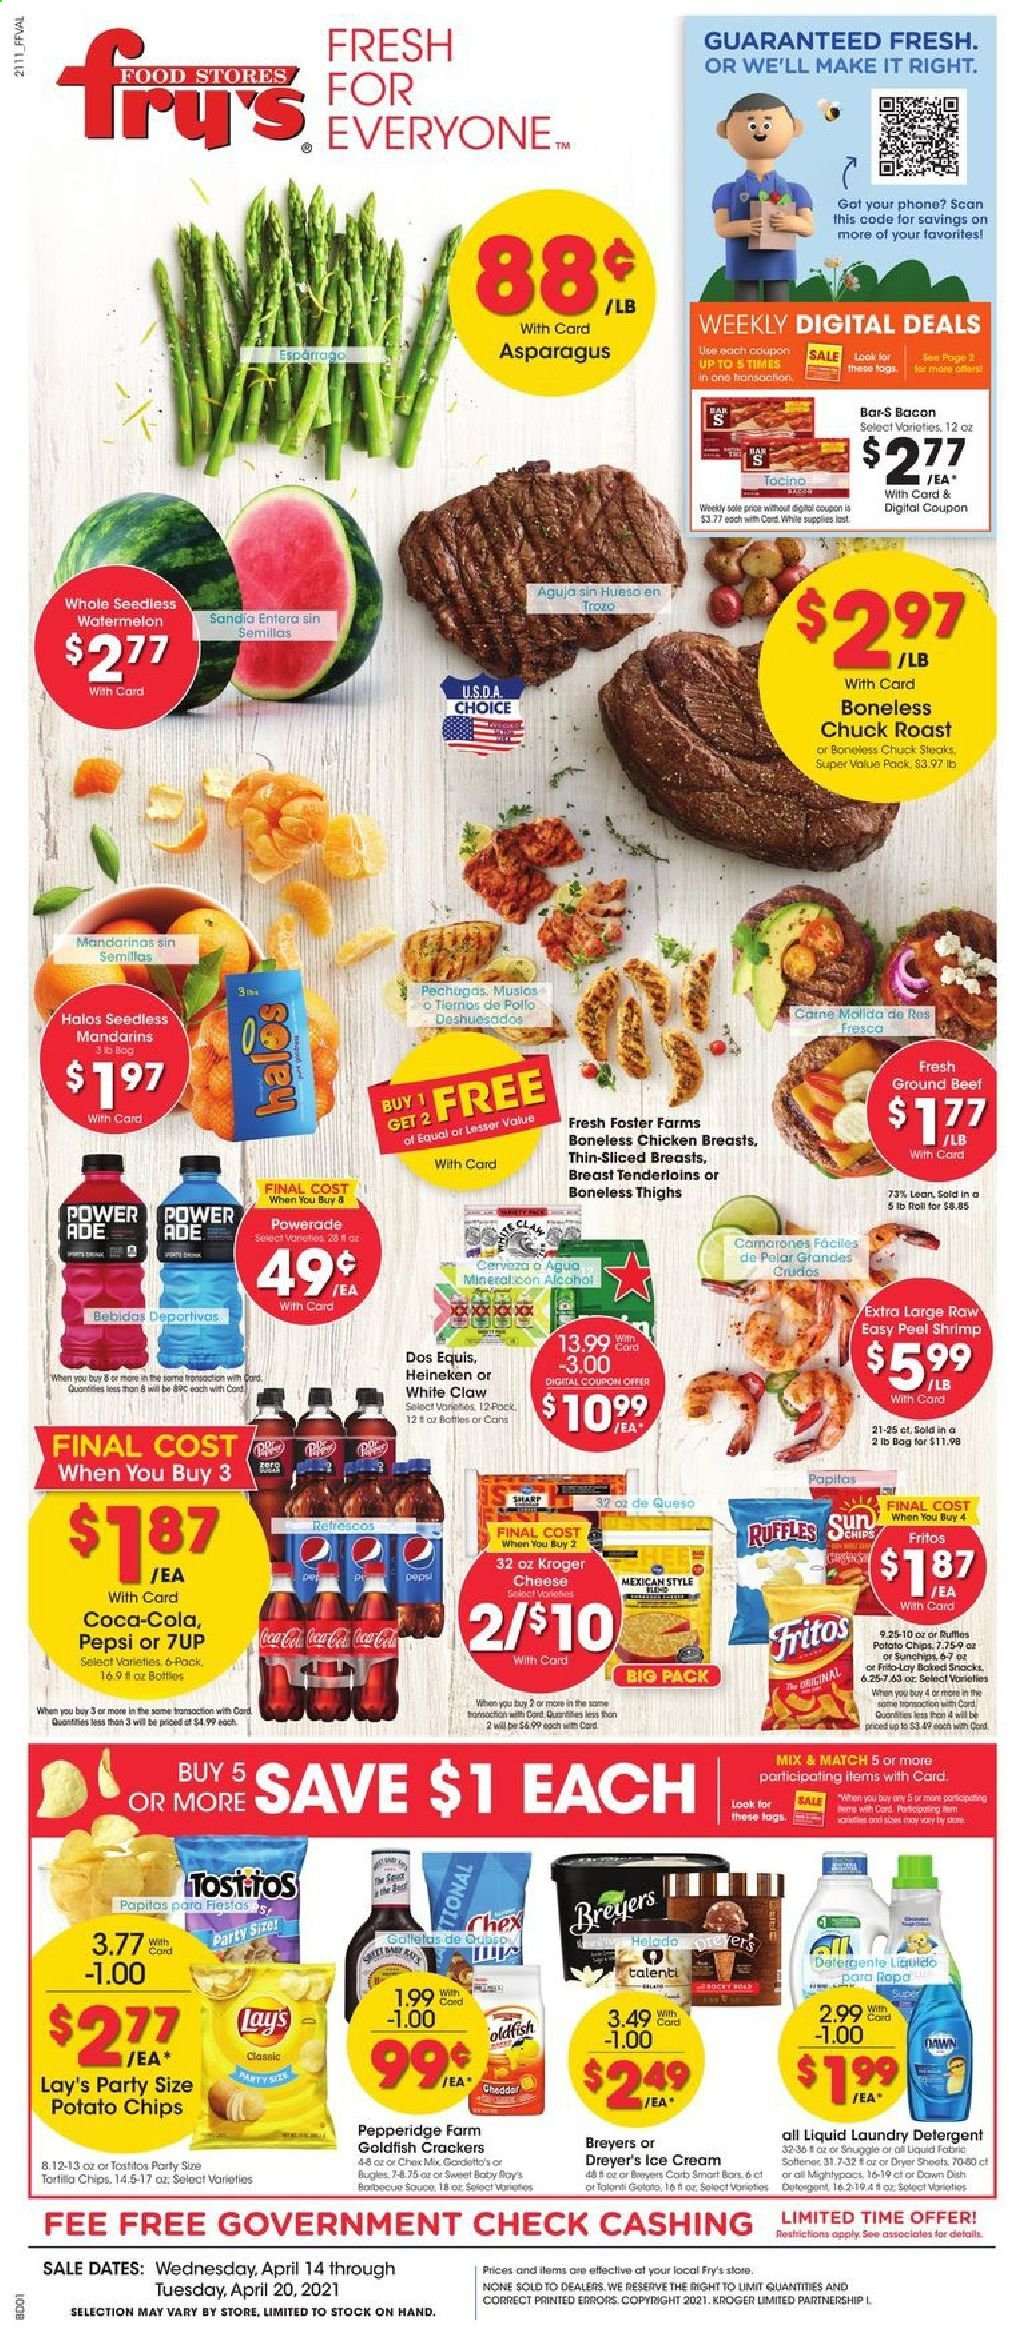 thumbnail - Fry’s Flyer - 04/14/2021 - 04/20/2021 - Sales products - asparagus, mandarines, watermelon, shrimps, bacon, cheese, ice cream, Talenti Gelato, snack, crackers, Fritos, tortilla chips, potato chips, chips, Lay’s, Goldfish, Frito-Lay, Ruffles, Tostitos, Chex Mix, Coca-Cola, Powerade, Pepsi, 7UP, alcohol, White Claw, beer, Dos Equis, Heineken, chicken breasts, beef meat, ground beef, steak, chuck roast, detergent, fabric softener, laundry detergent, dryer sheets, Jays. Page 1.